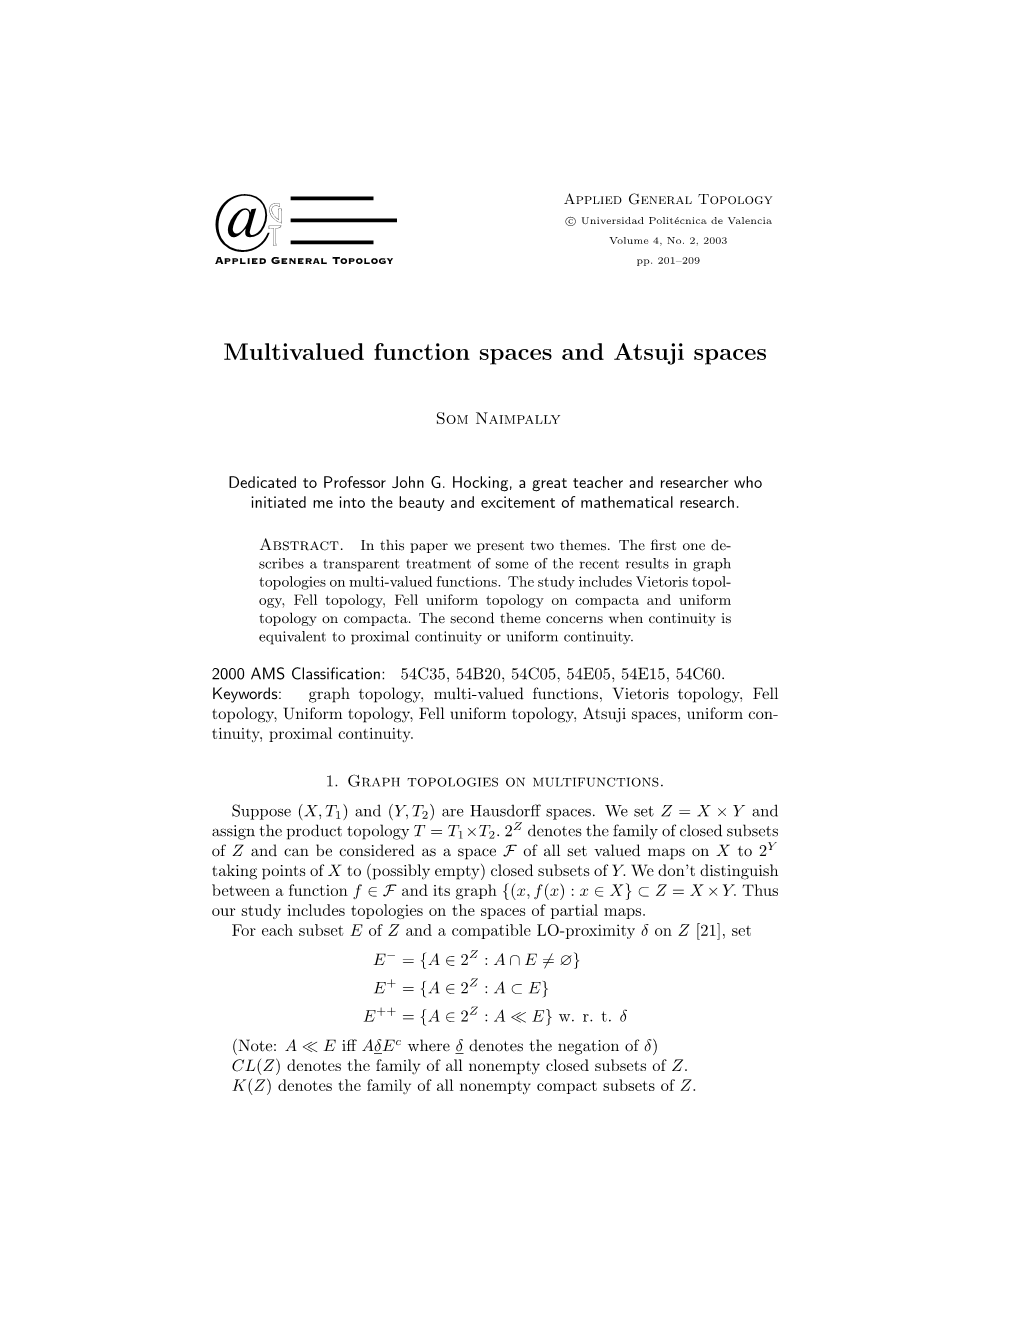 Multivalued Function Spaces and Atsuji Spaces